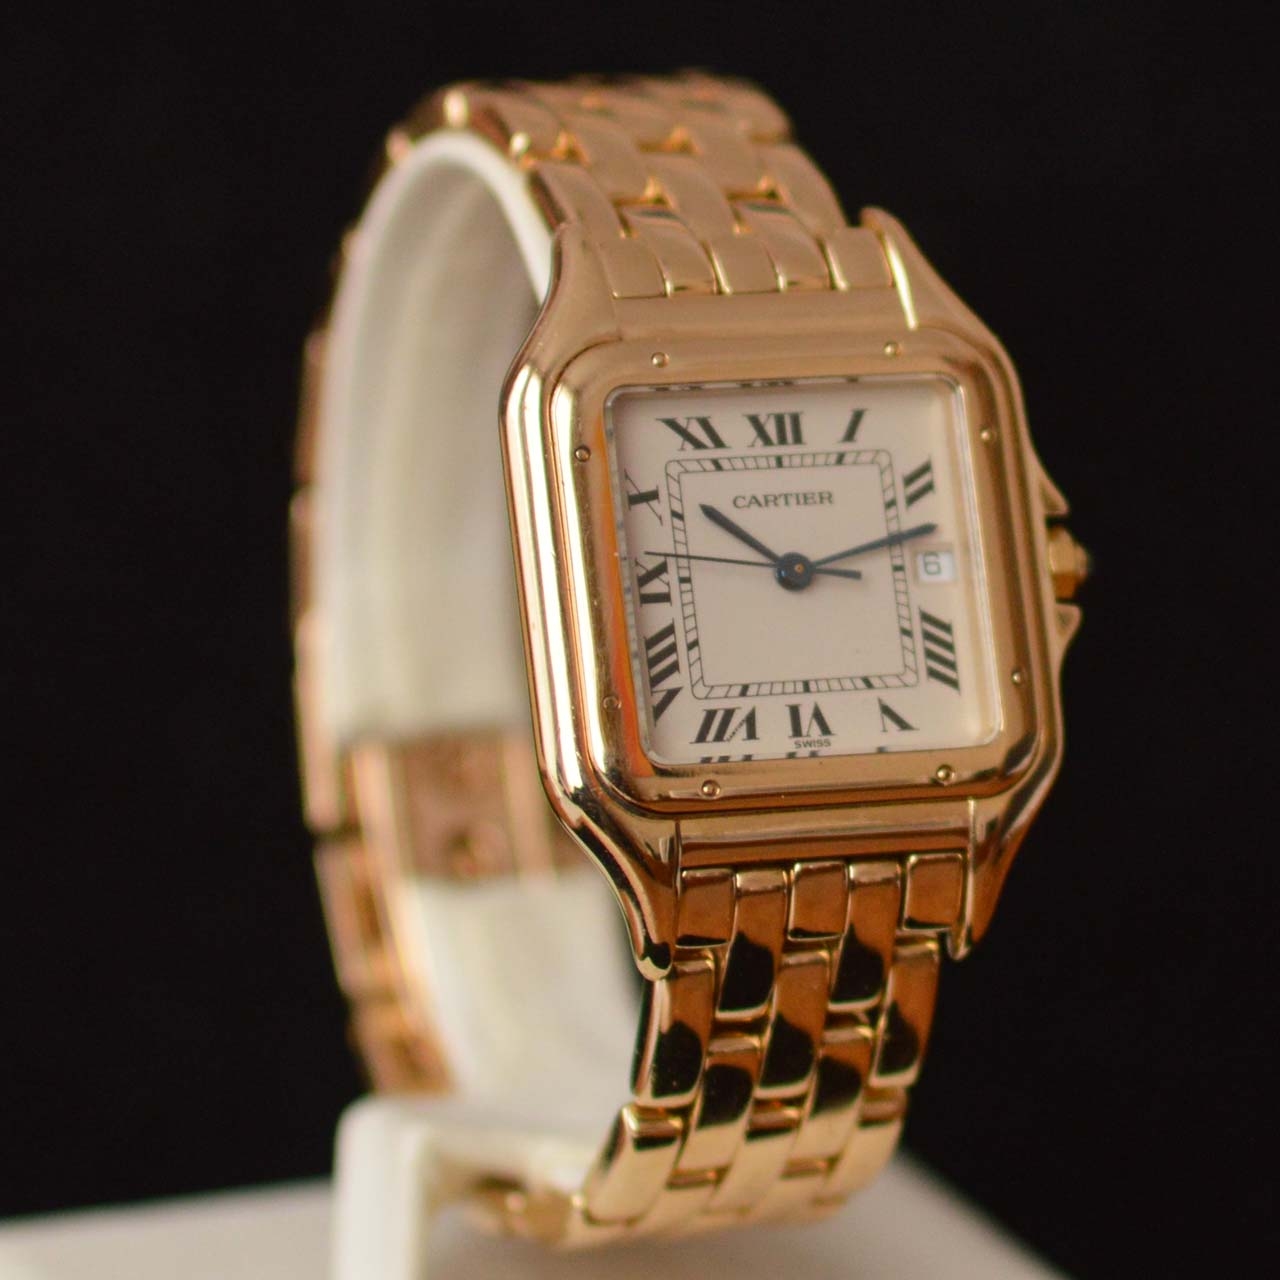 Cartier panthere watch price